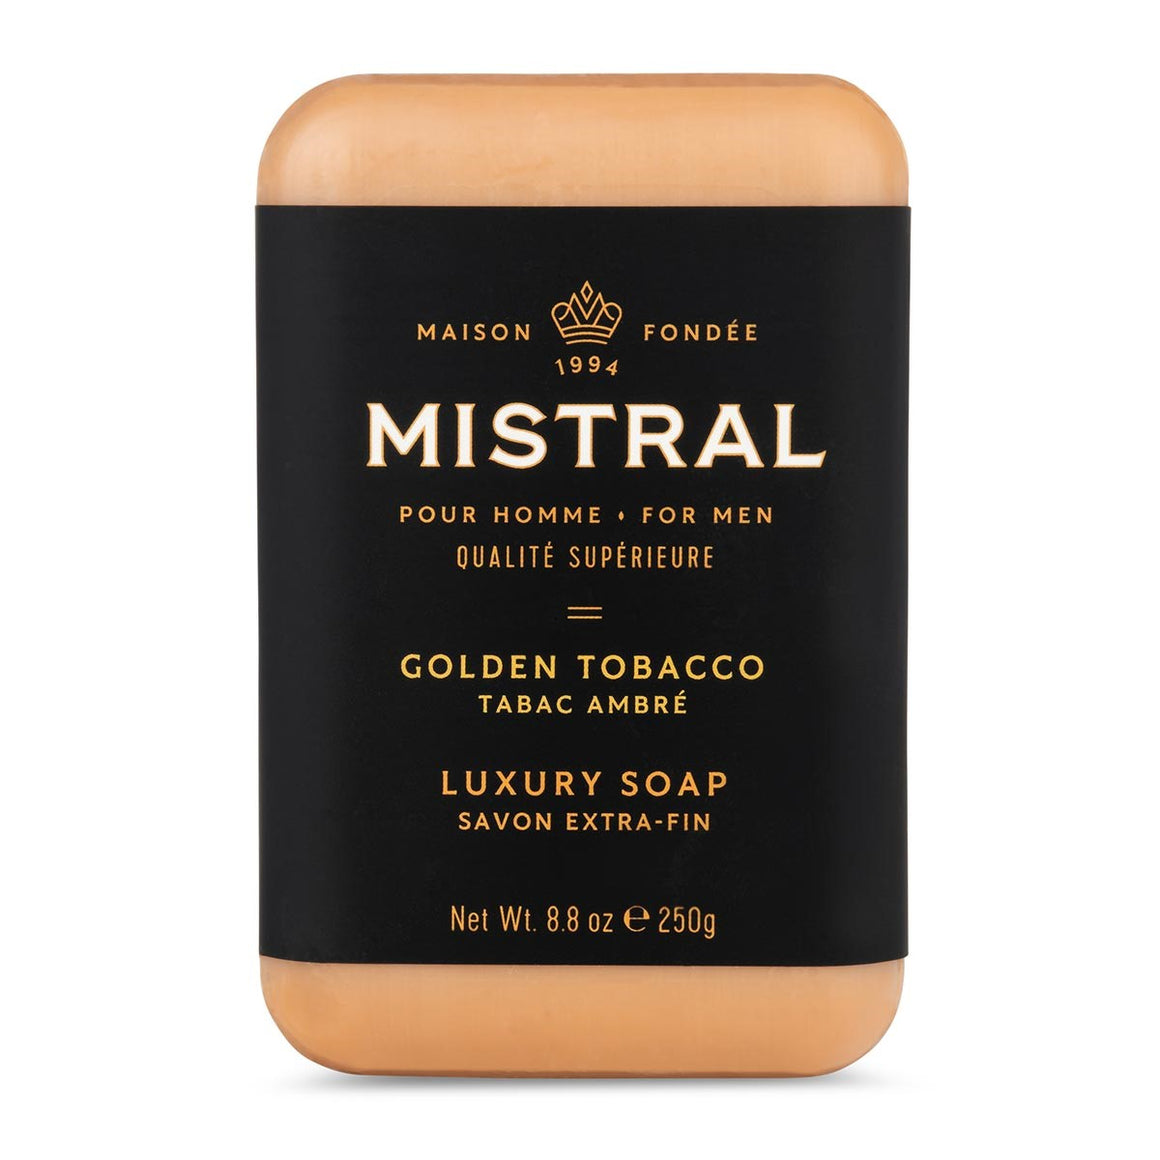 Mistral - Luxury French Bath & Body: Men's Grooming products